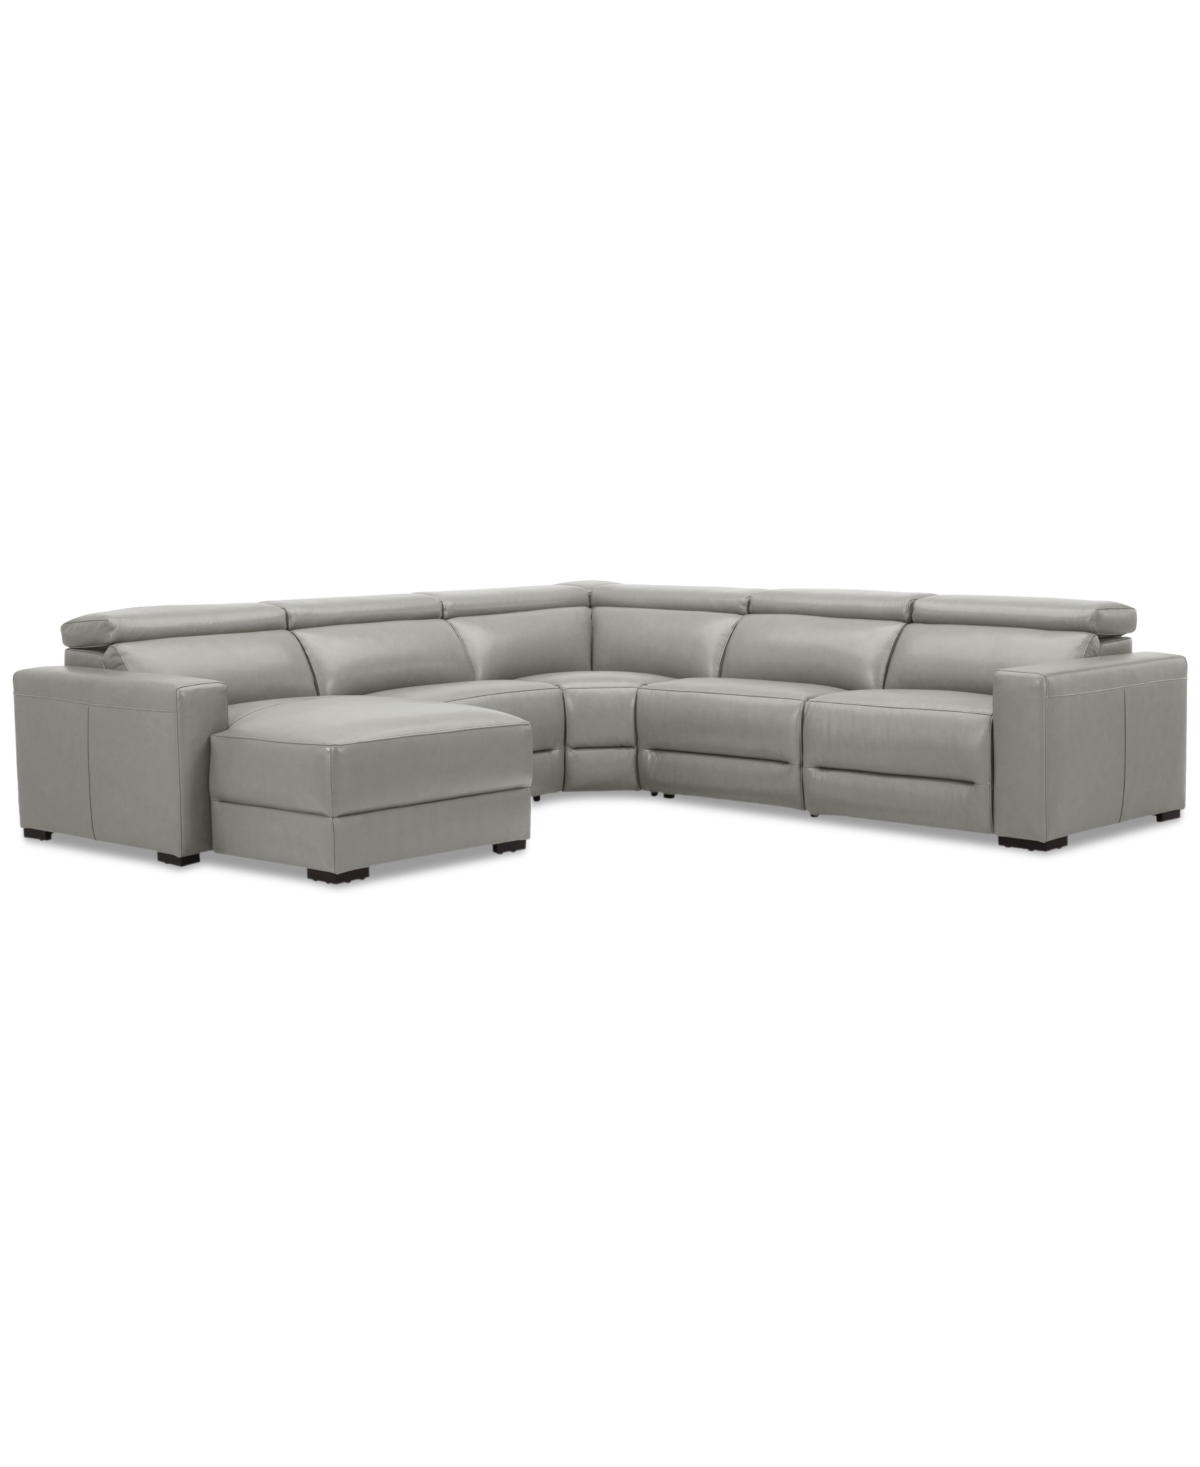 Macy's Nevio 124" 5-pc. Leather Sectional With 1 Power Recliner, Headrests And Chaise, Created For  In Light Grey